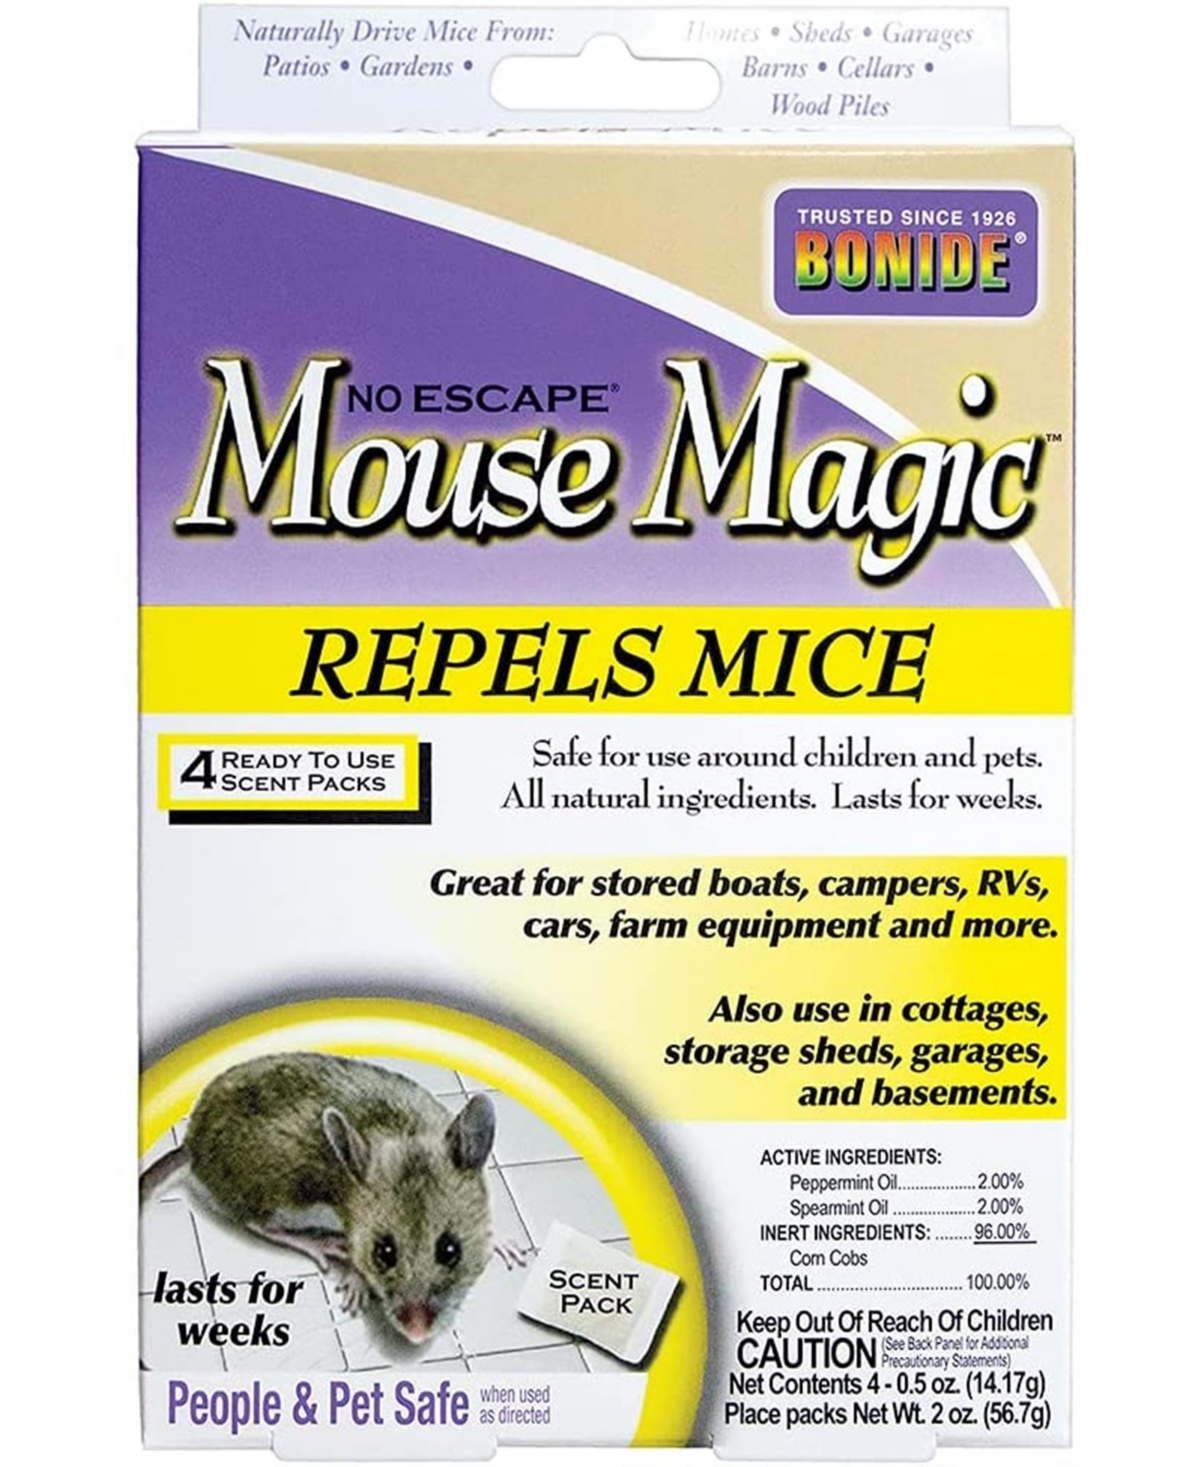 15637153 Bonide Mouse Magic Ready-to-Use Scent Packs, 4 Sce sku 15637153